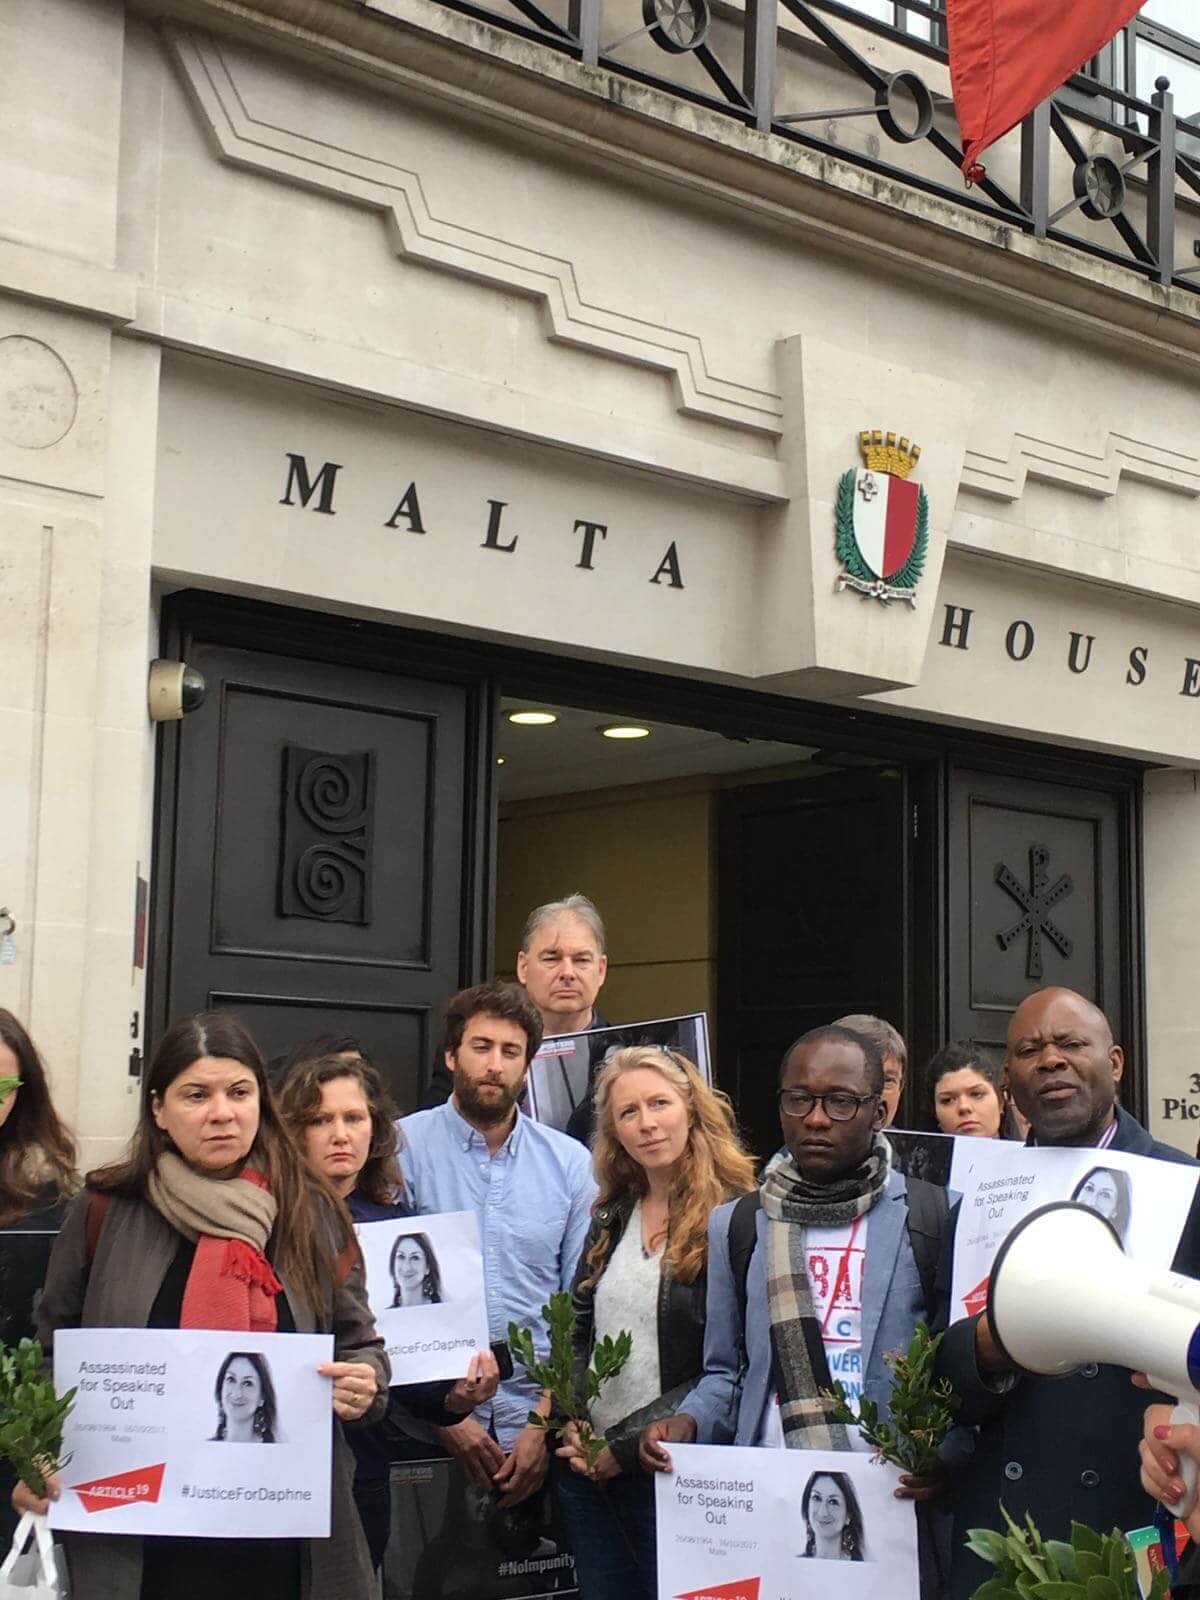 Six months on, London NGOs renew calls for justice for murder of Daphne Caruana Galizia - Protection